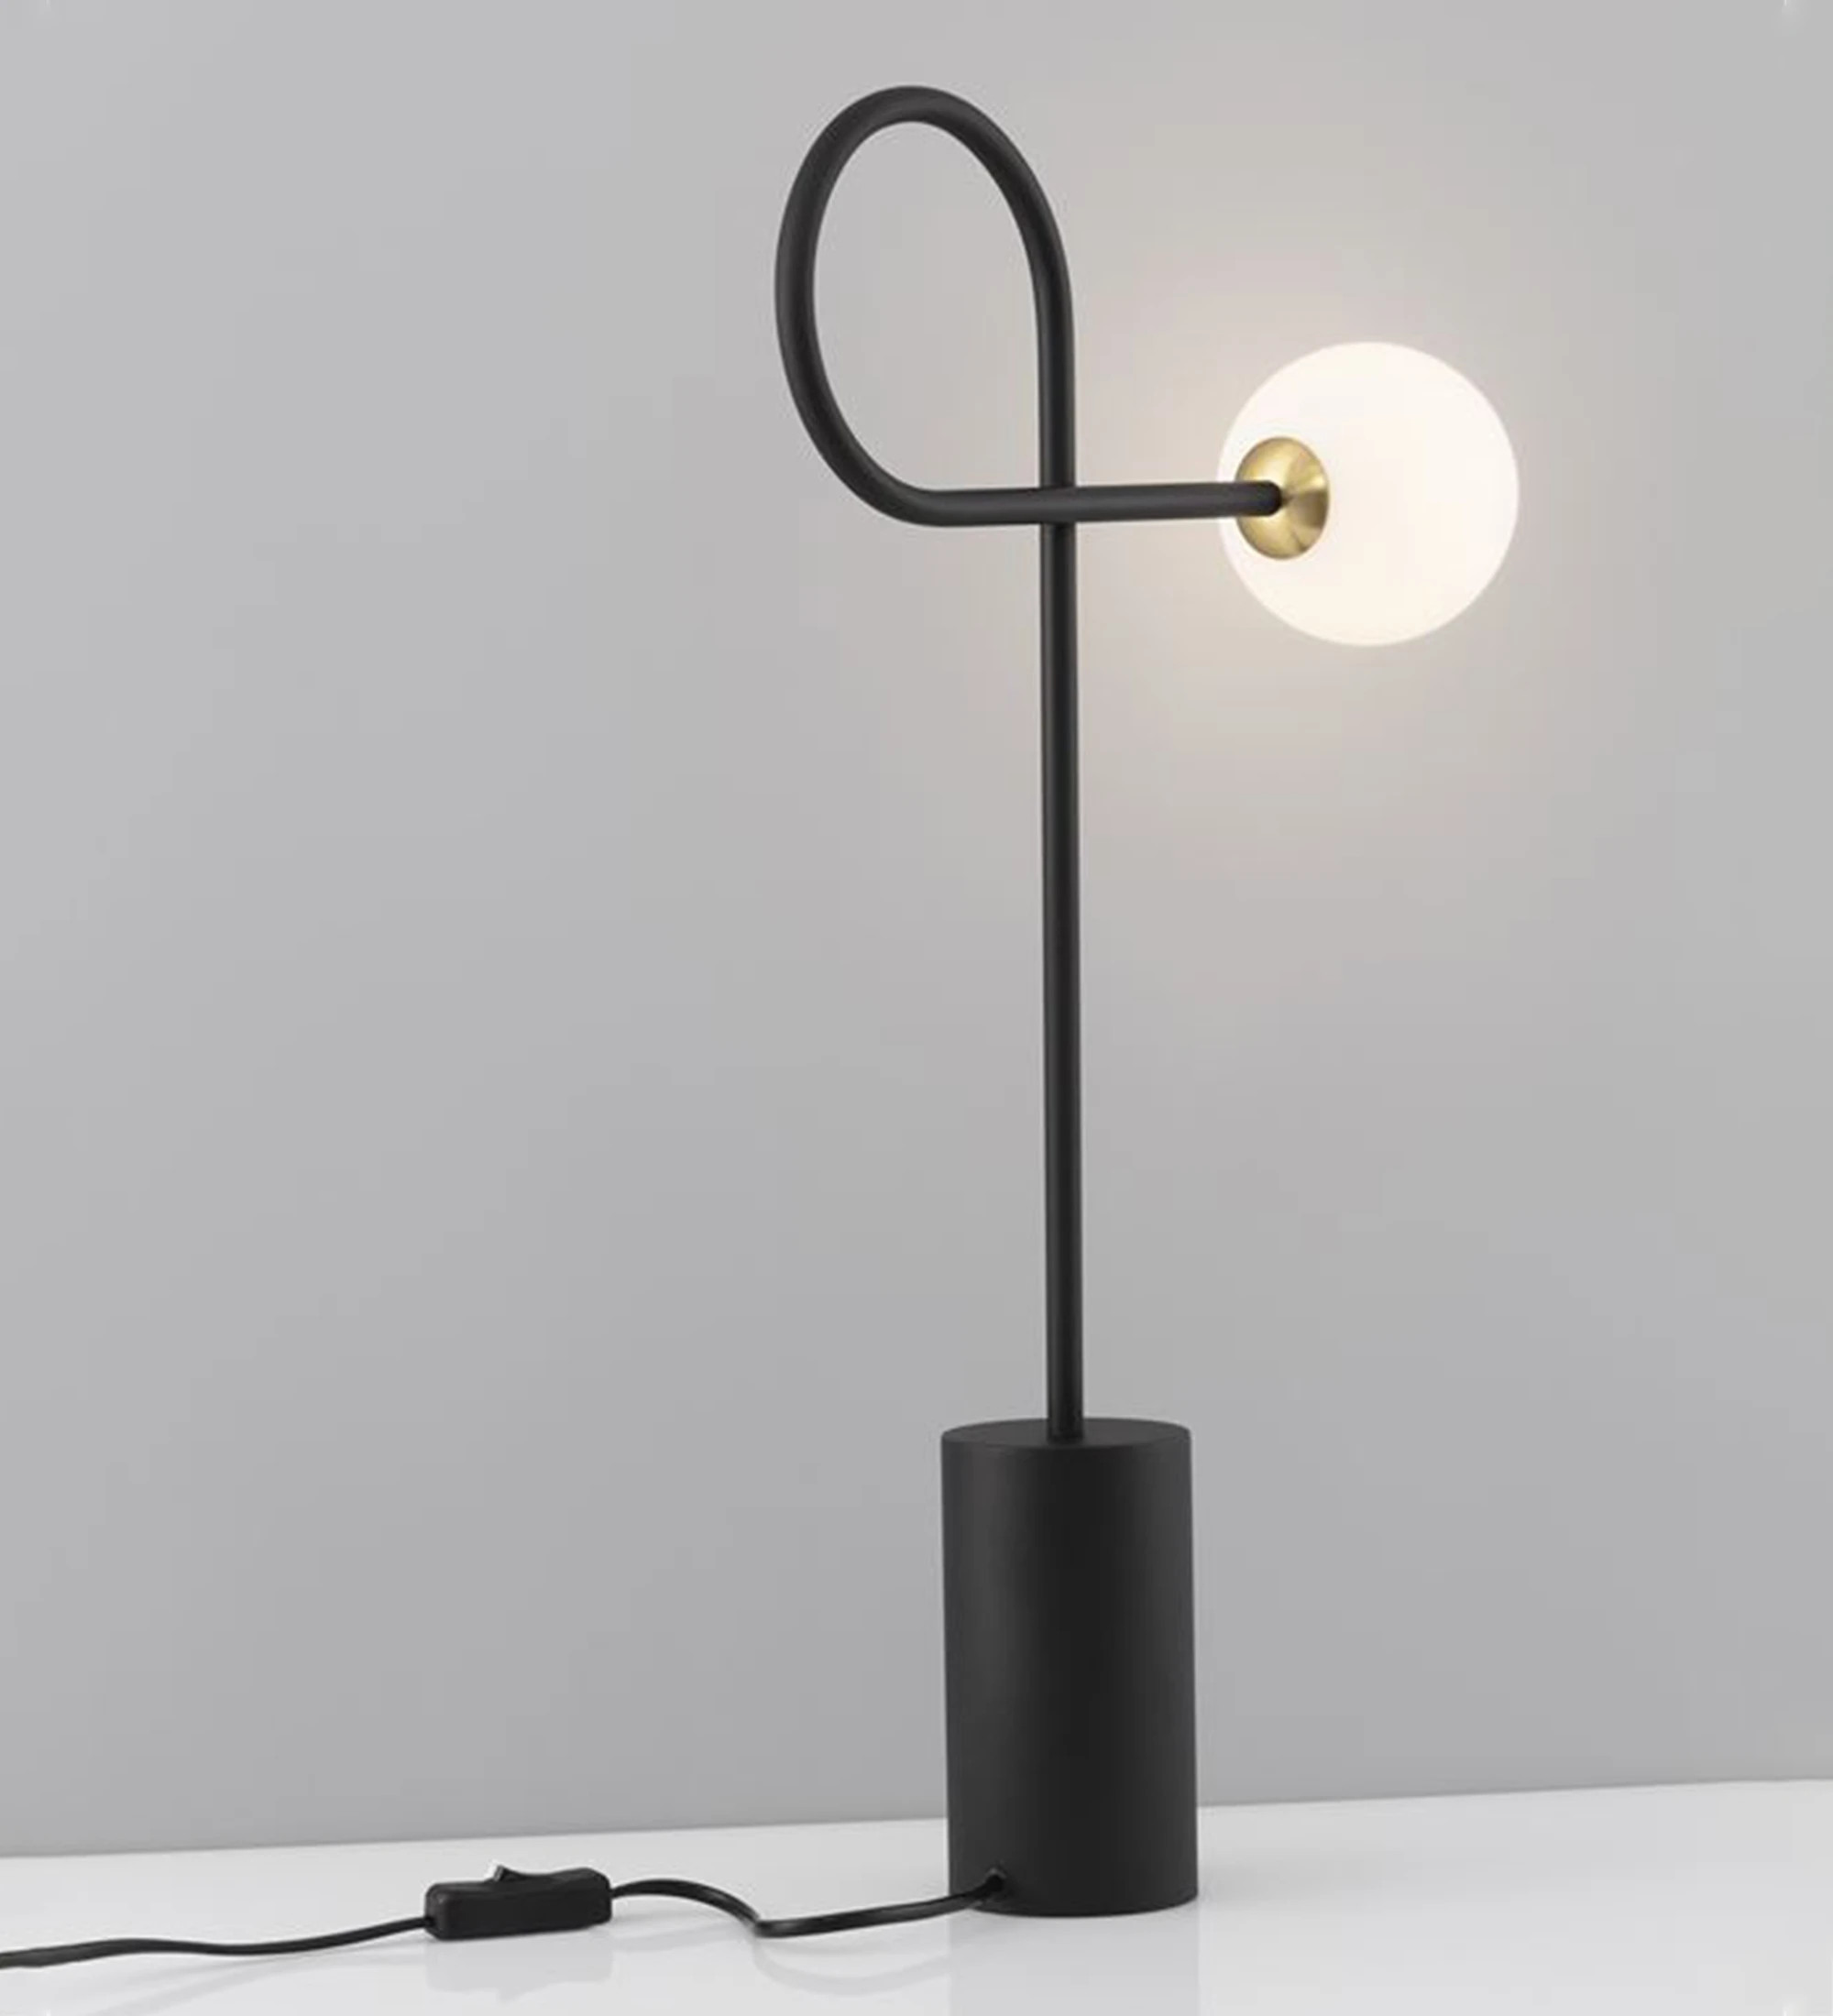  Table lamp in black aluminum and opal glass diffuser.